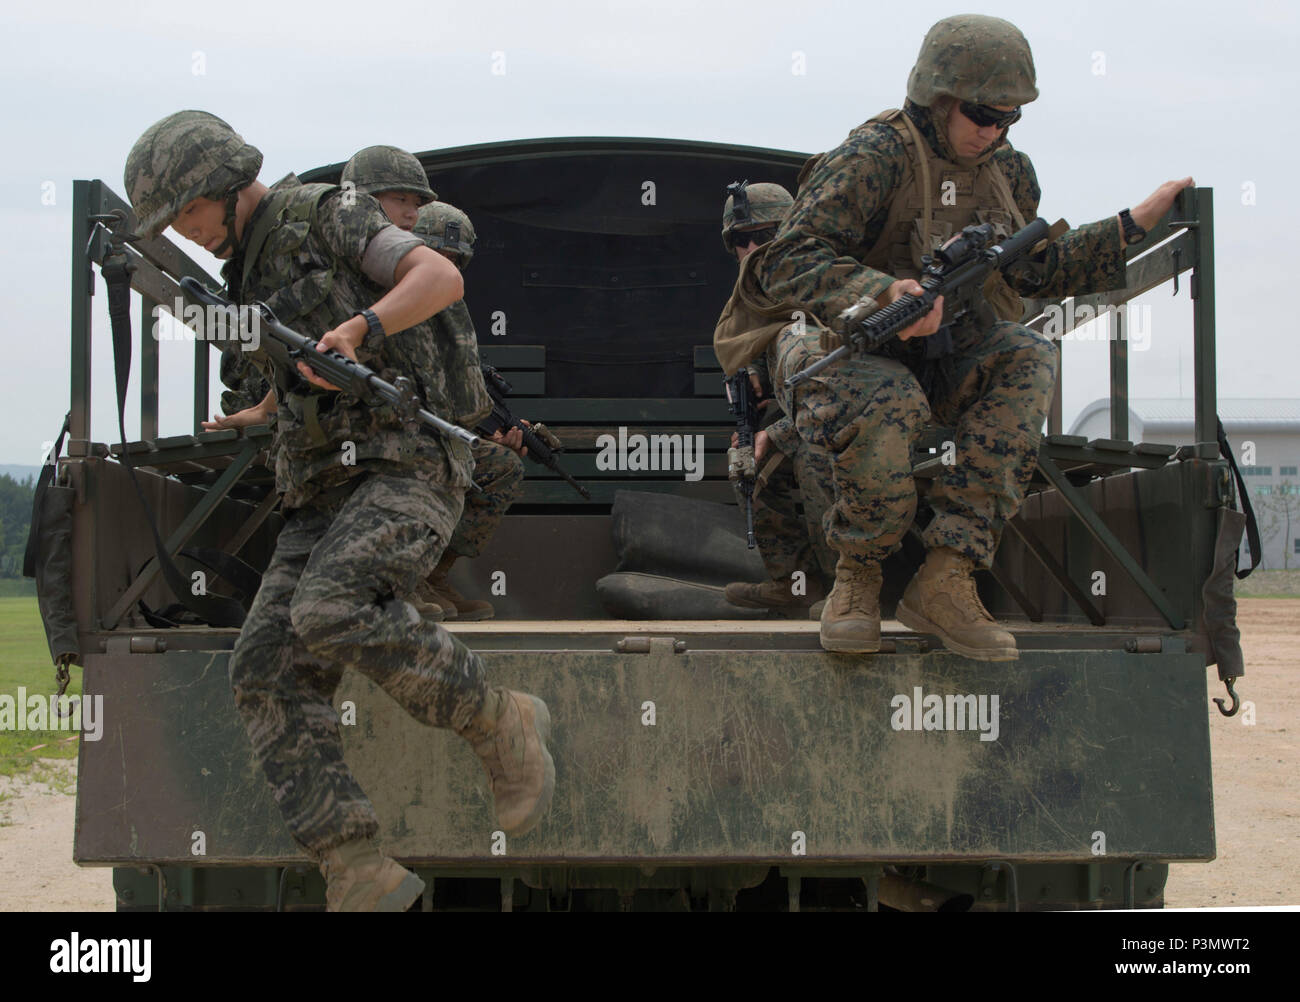 A Republic of Korea Marine and a U.S. Marine jump from the back of a truck during convoy escort training July 11, 2016 during Korean Marine Exchange Program 16-11. KMEP offers realistic training leveraging the most advanced tactics and technology to ensure a trained and ready ROK-U.S. combined force. The ROK Marines are with 73rd Battalion, 7th Regiment, 1st Marine Division. The U.S. Marines participating in this training event are with 2nd Battalion, 2nd Marine Regiment, currently assigned to 4th Marine Regiment, 3rd Marine Division, III Marine Expeditionary Force through the unit deployment  Stock Photo